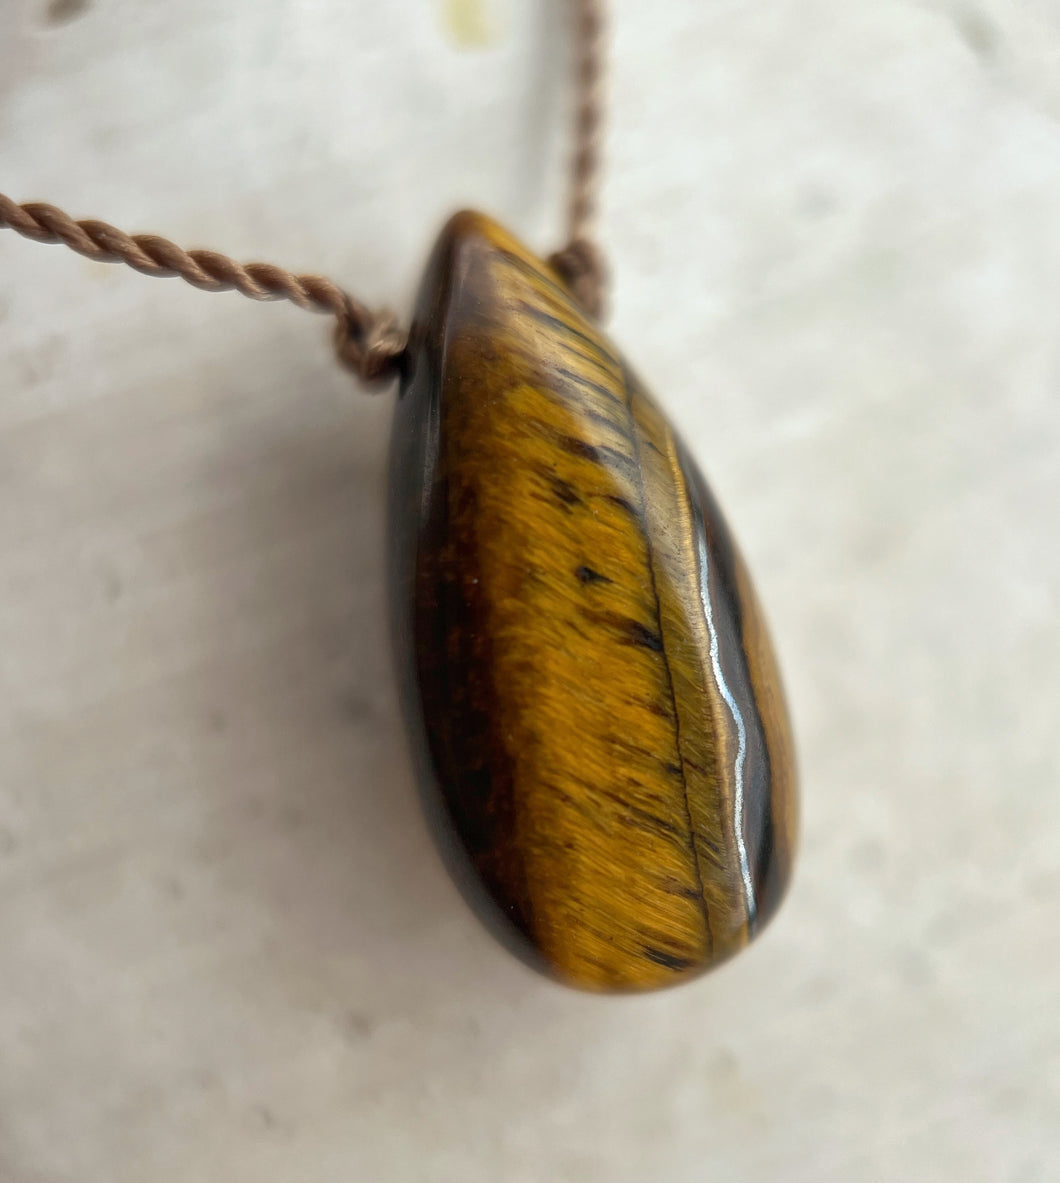 Tigers Eye Cord Necklace